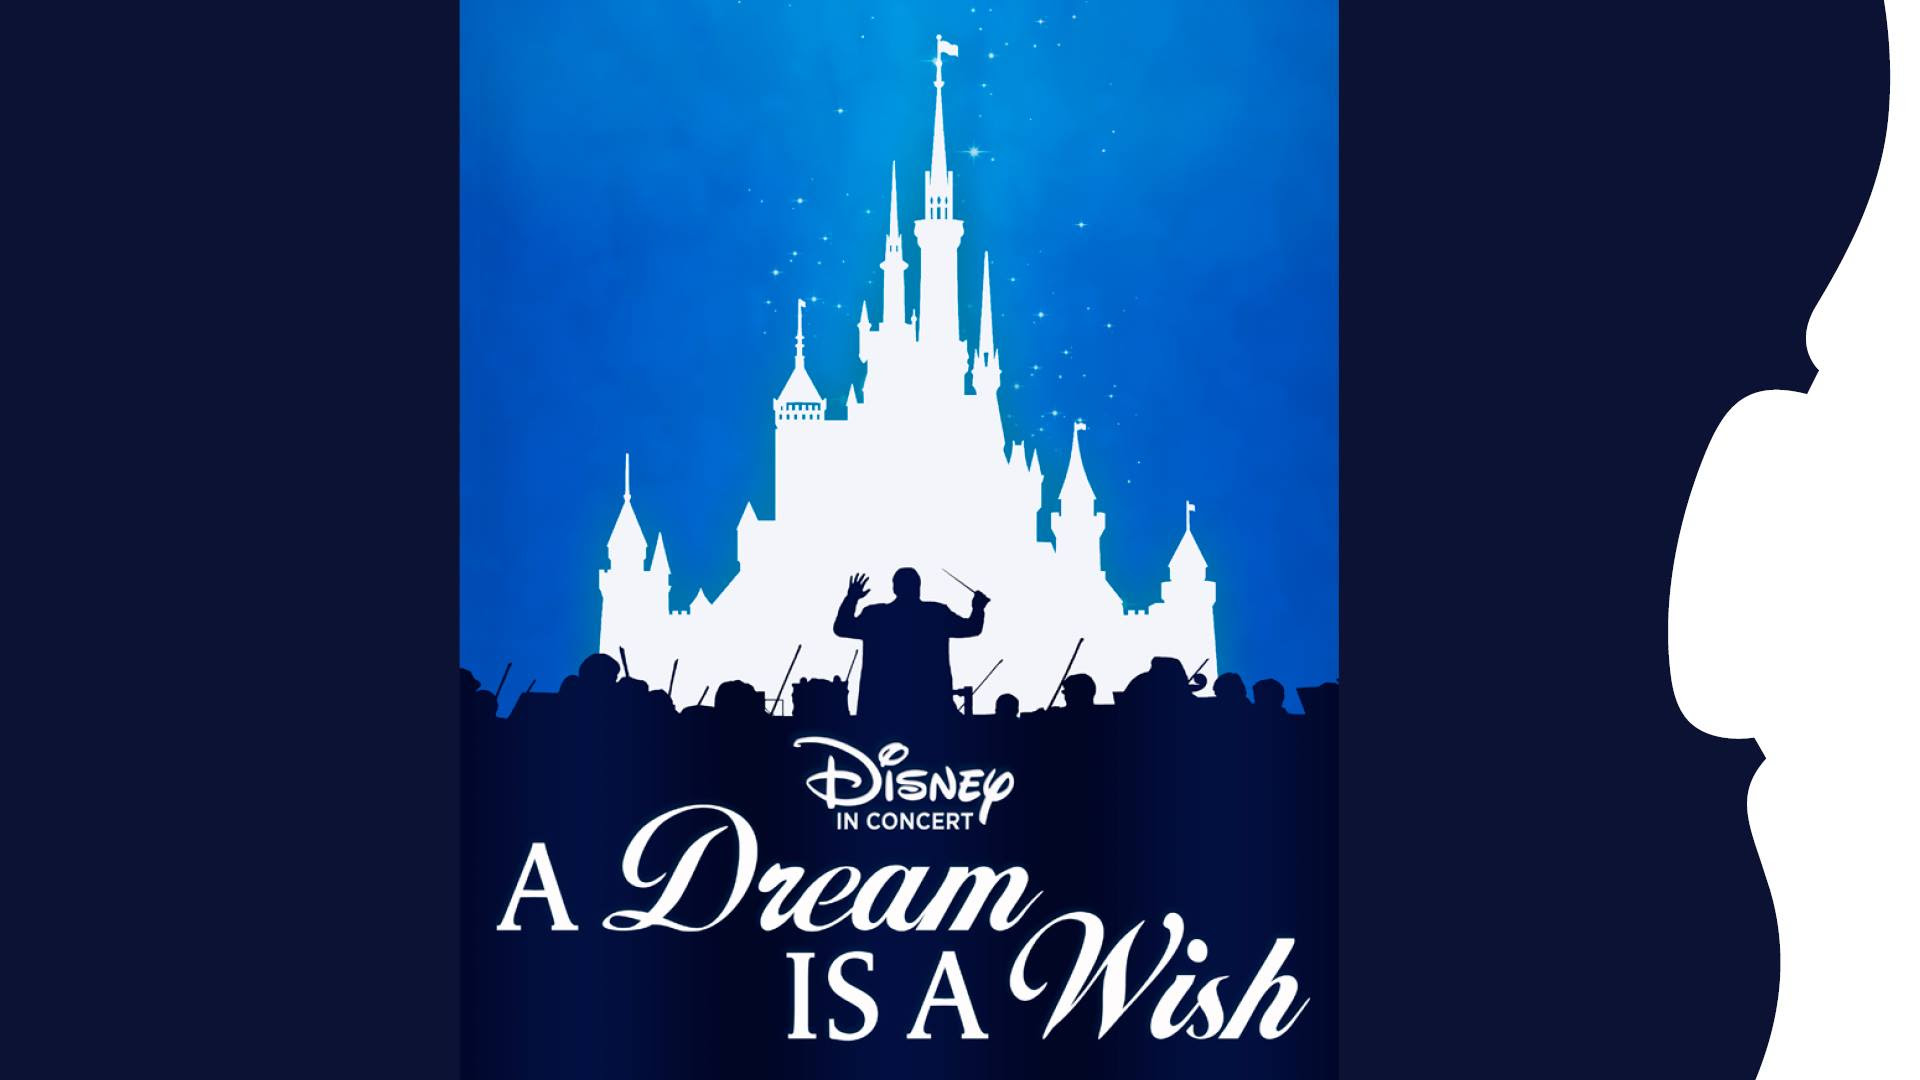 Disney in Concert: A Dream Is A Wish